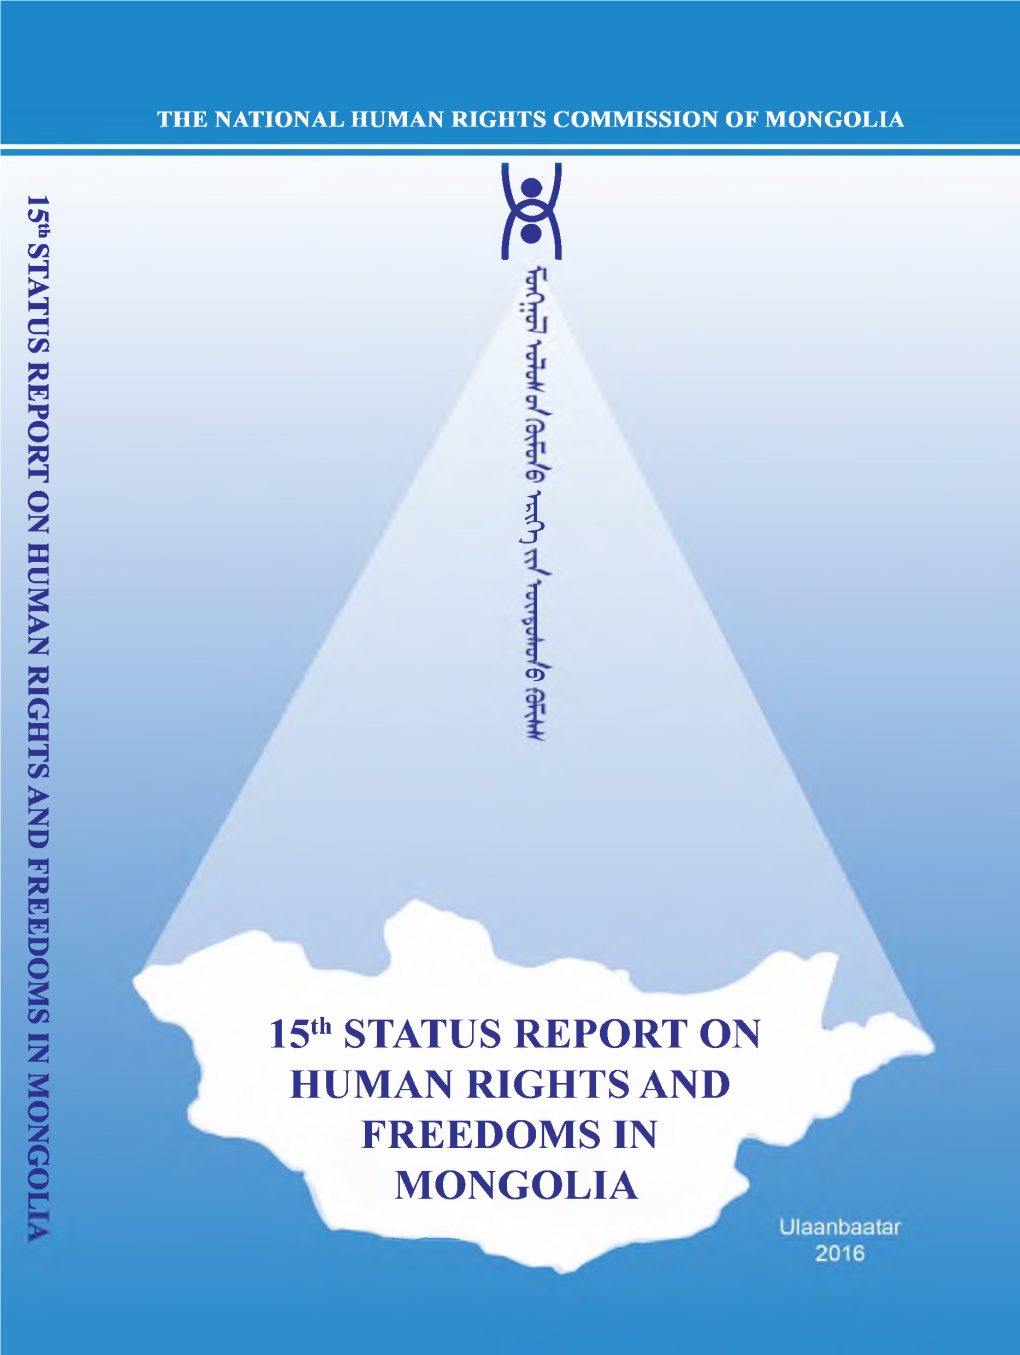 15Th STATUS REPORT on HUMAN RIGHTS and FREEDOMS in MONGOL NATIONAL HUMAN RIGHTS COMMISSION of MONGOLIA